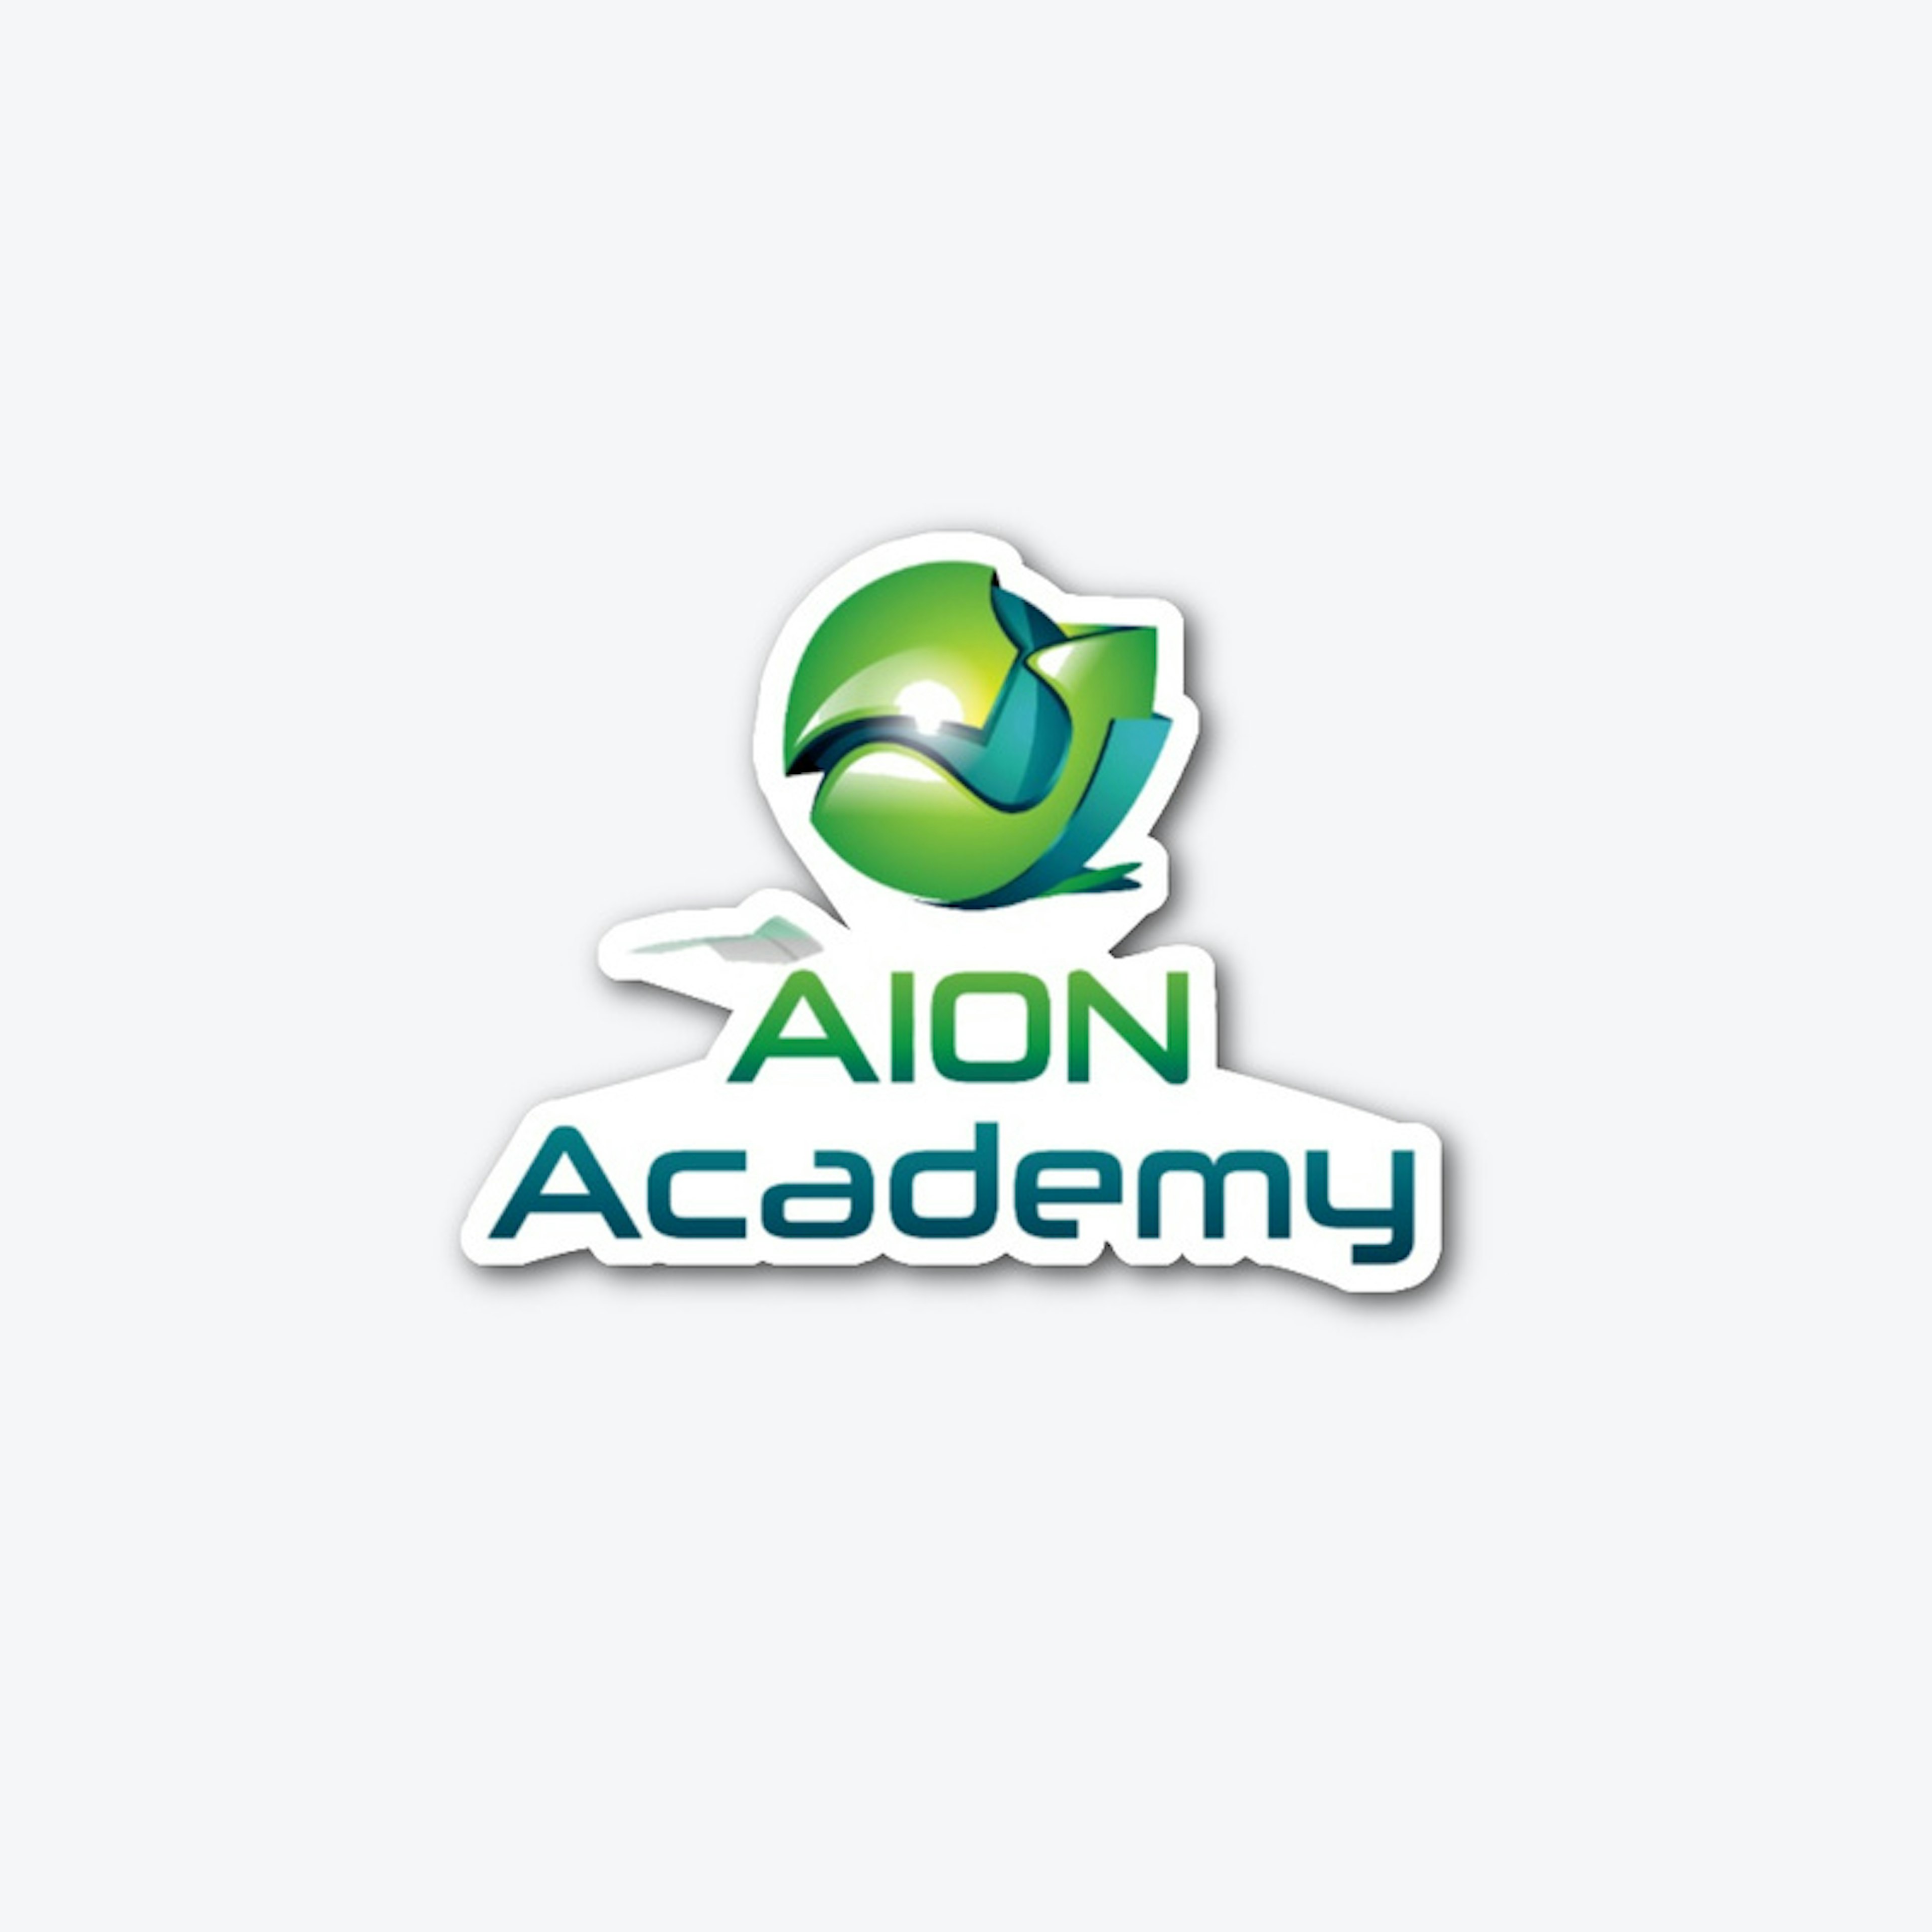 AION Academy Accessories